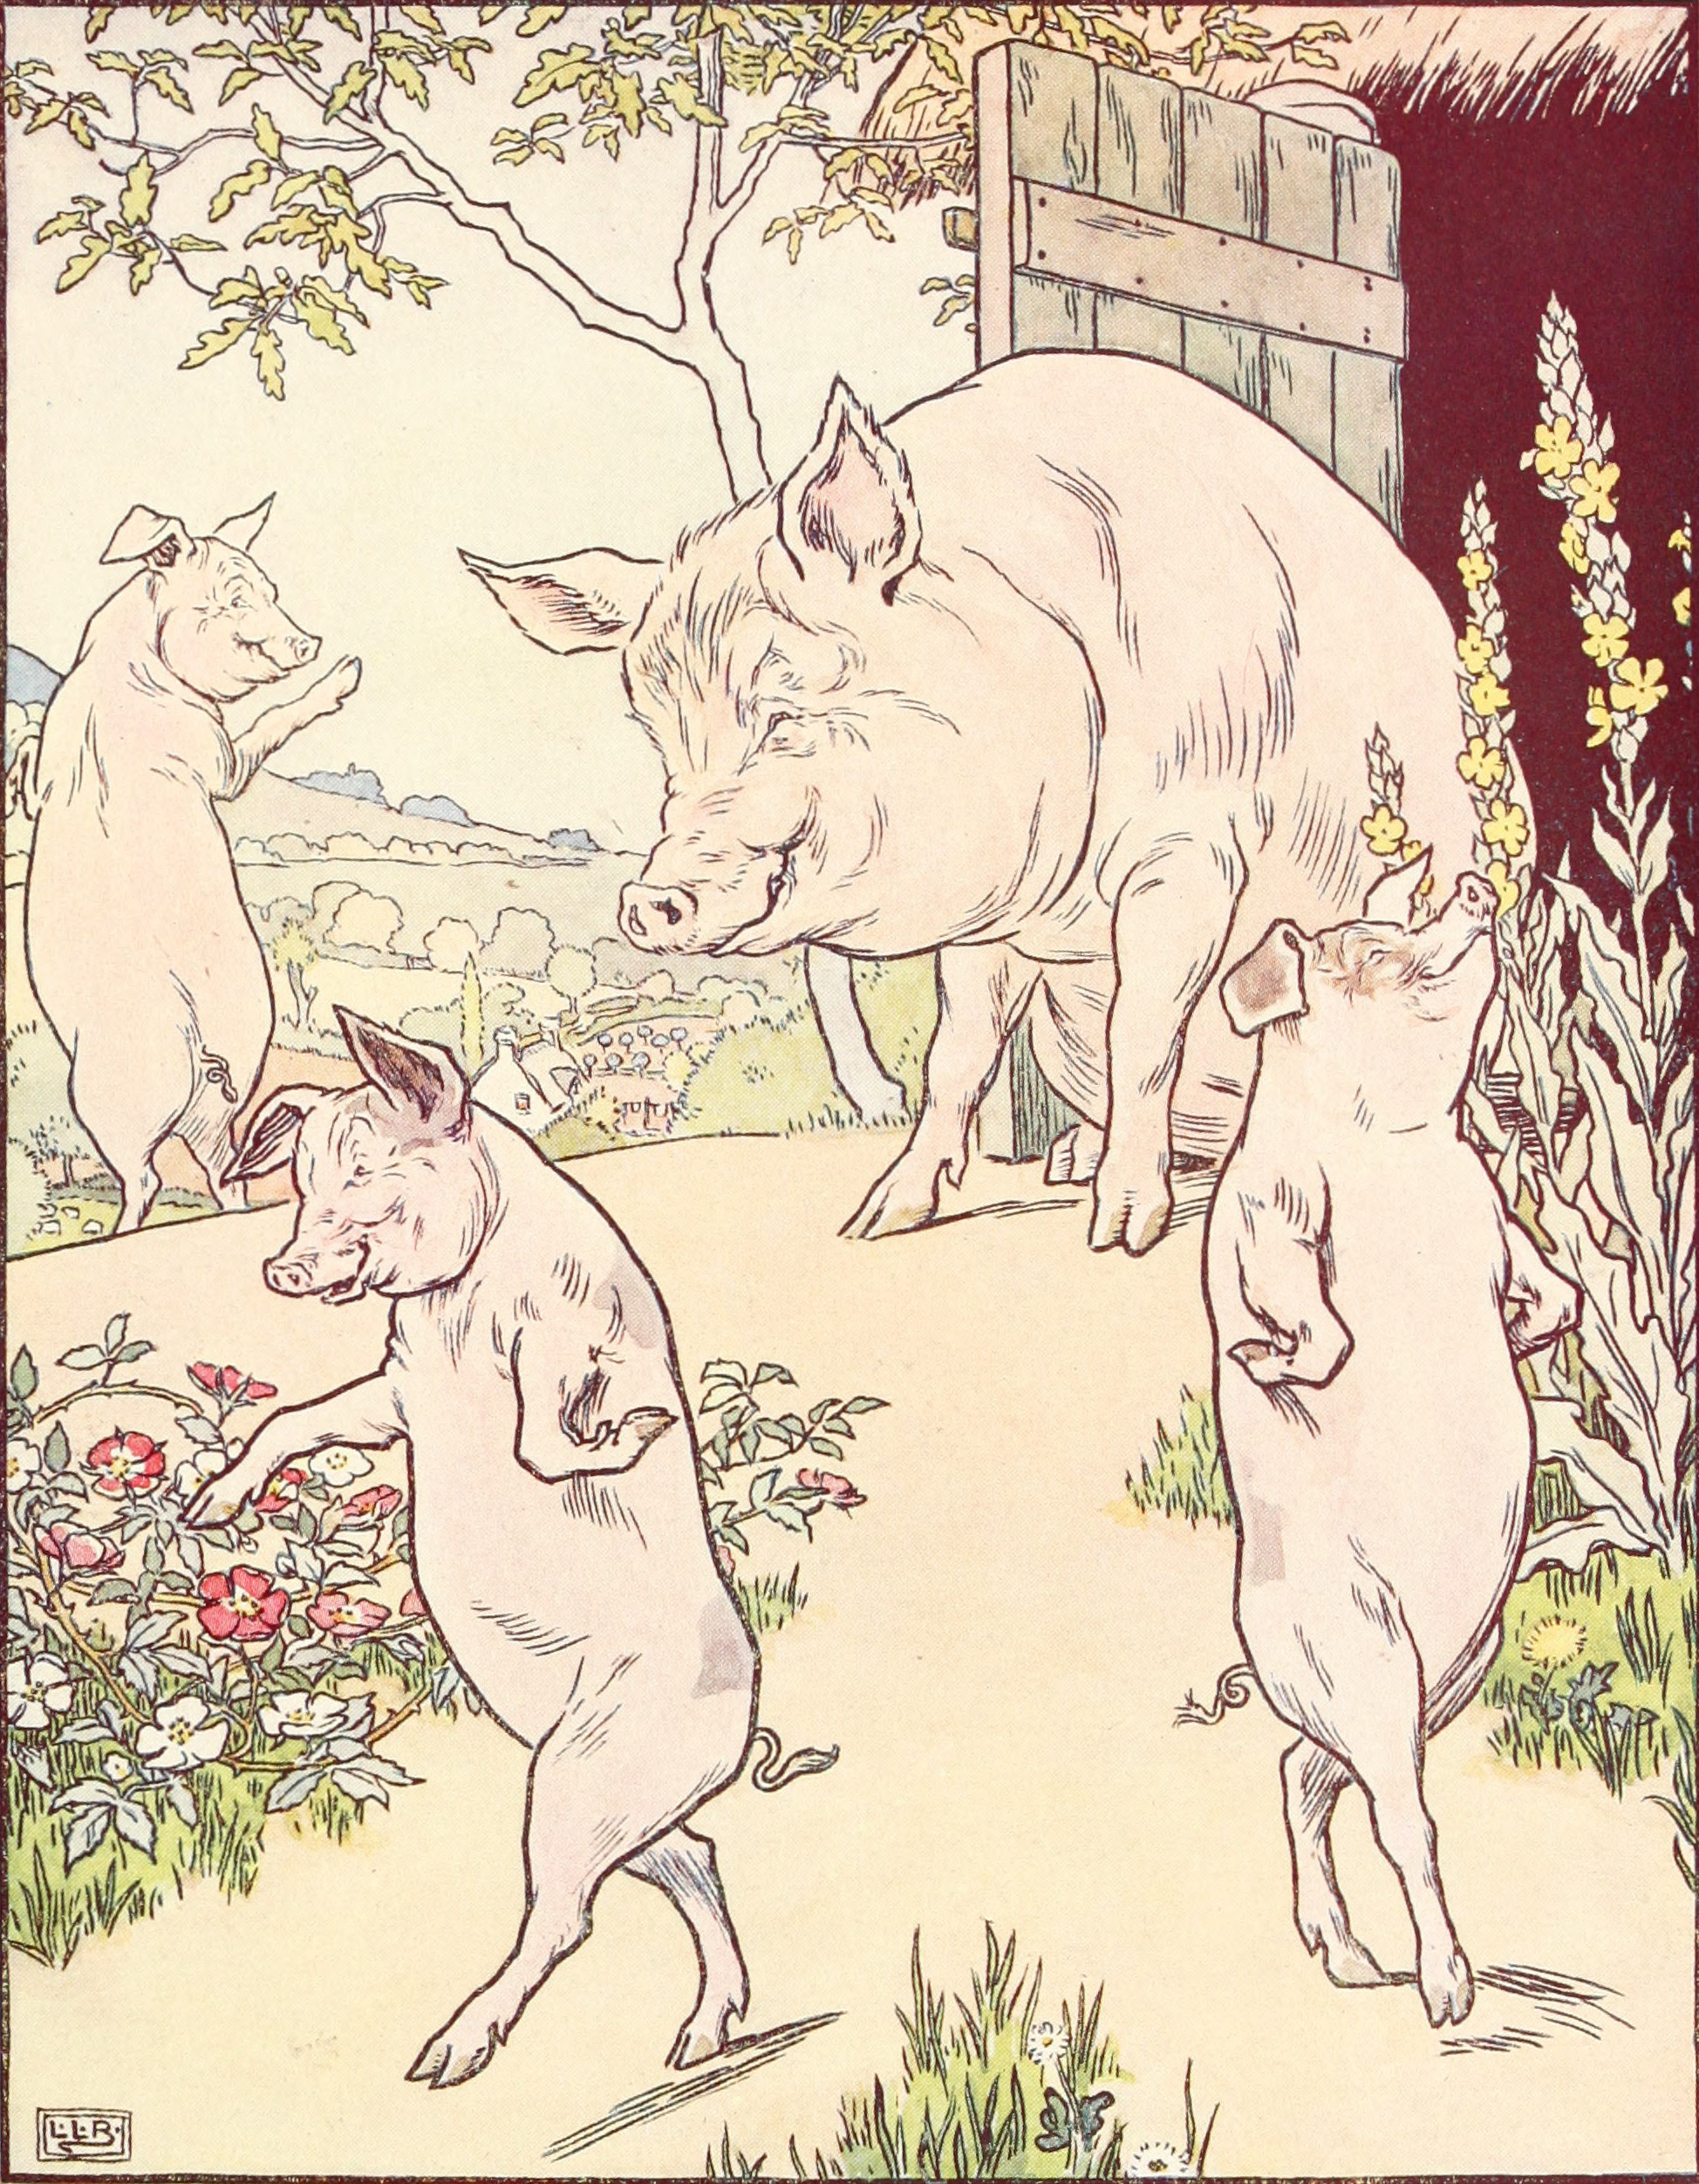 File:Three little pigs and mother sow - Project Gutenberg eText 15661.jpg